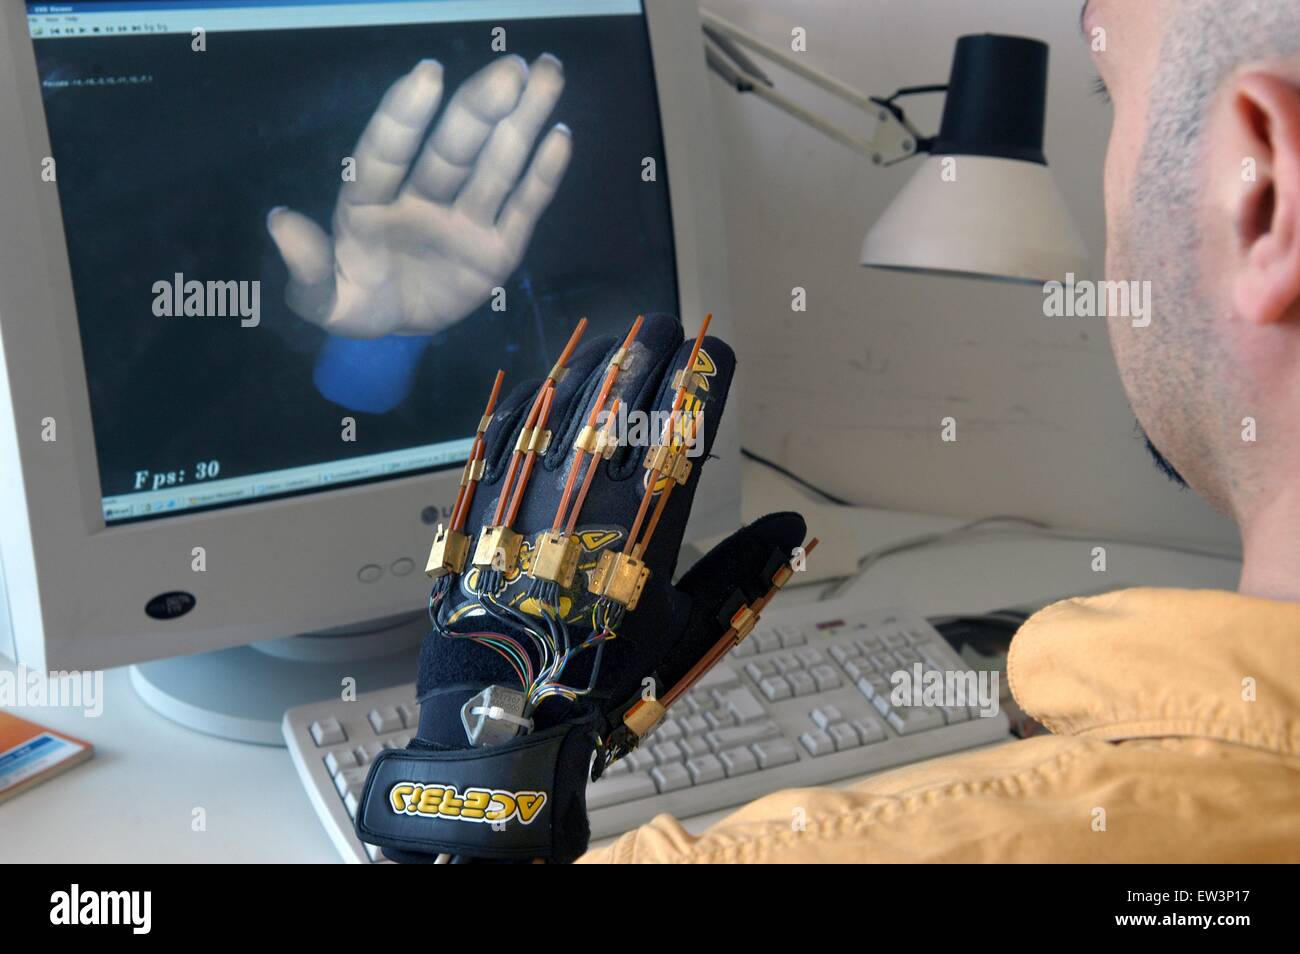 Advanced School St.Anna of Pisa (Italy), Laboratory PERCRO,  research on virtual reality; glove for virtual reality Stock Photo